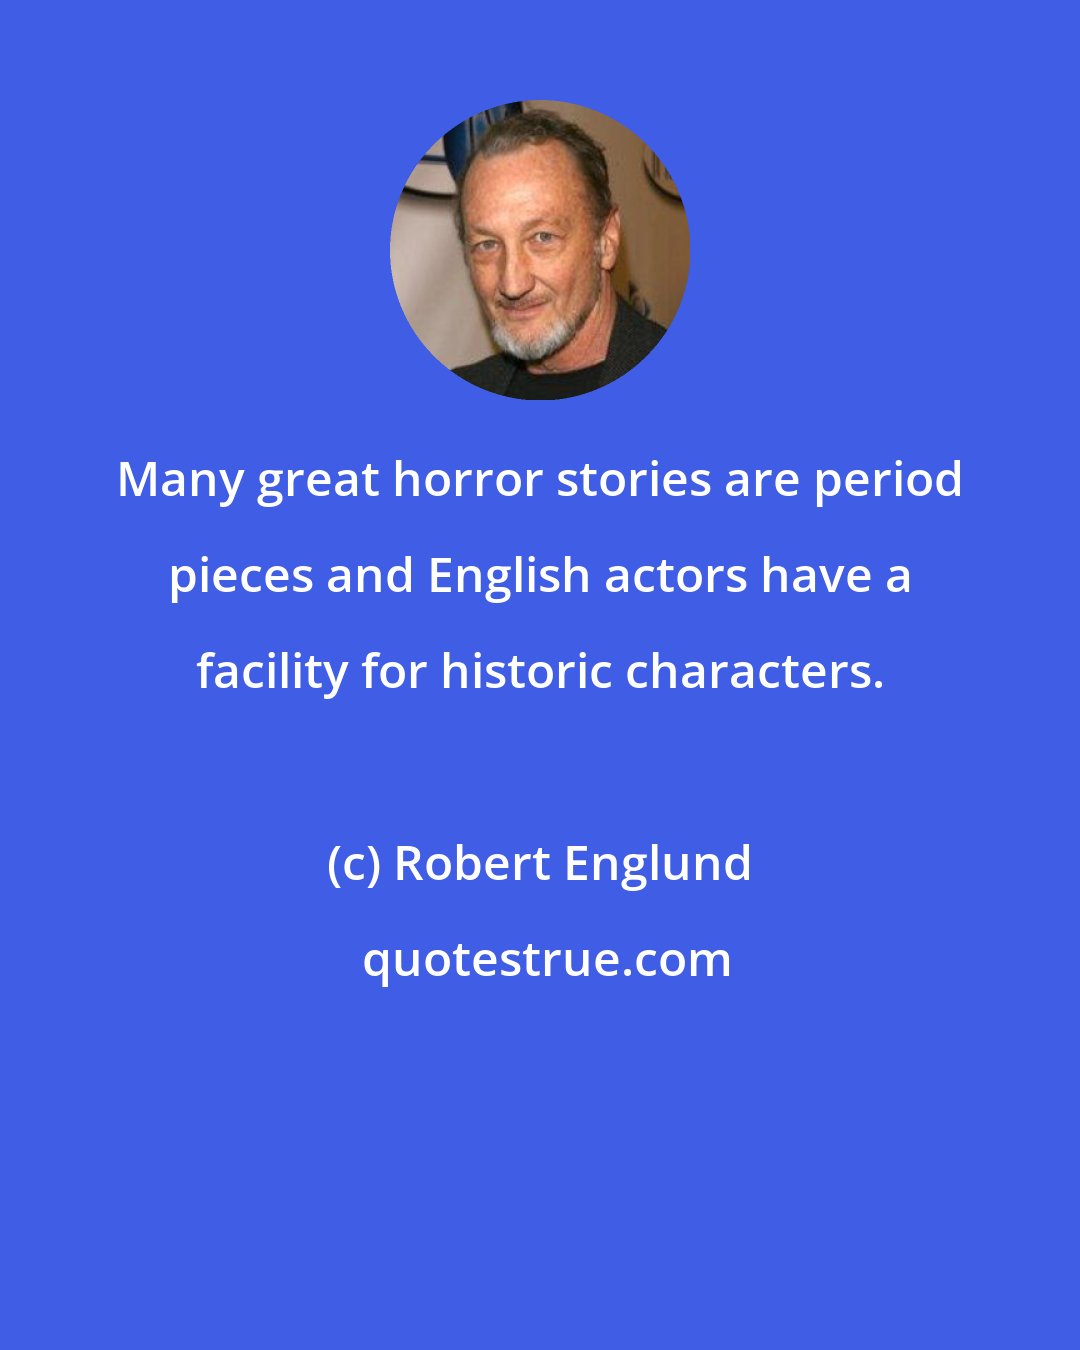 Robert Englund: Many great horror stories are period pieces and English actors have a facility for historic characters.